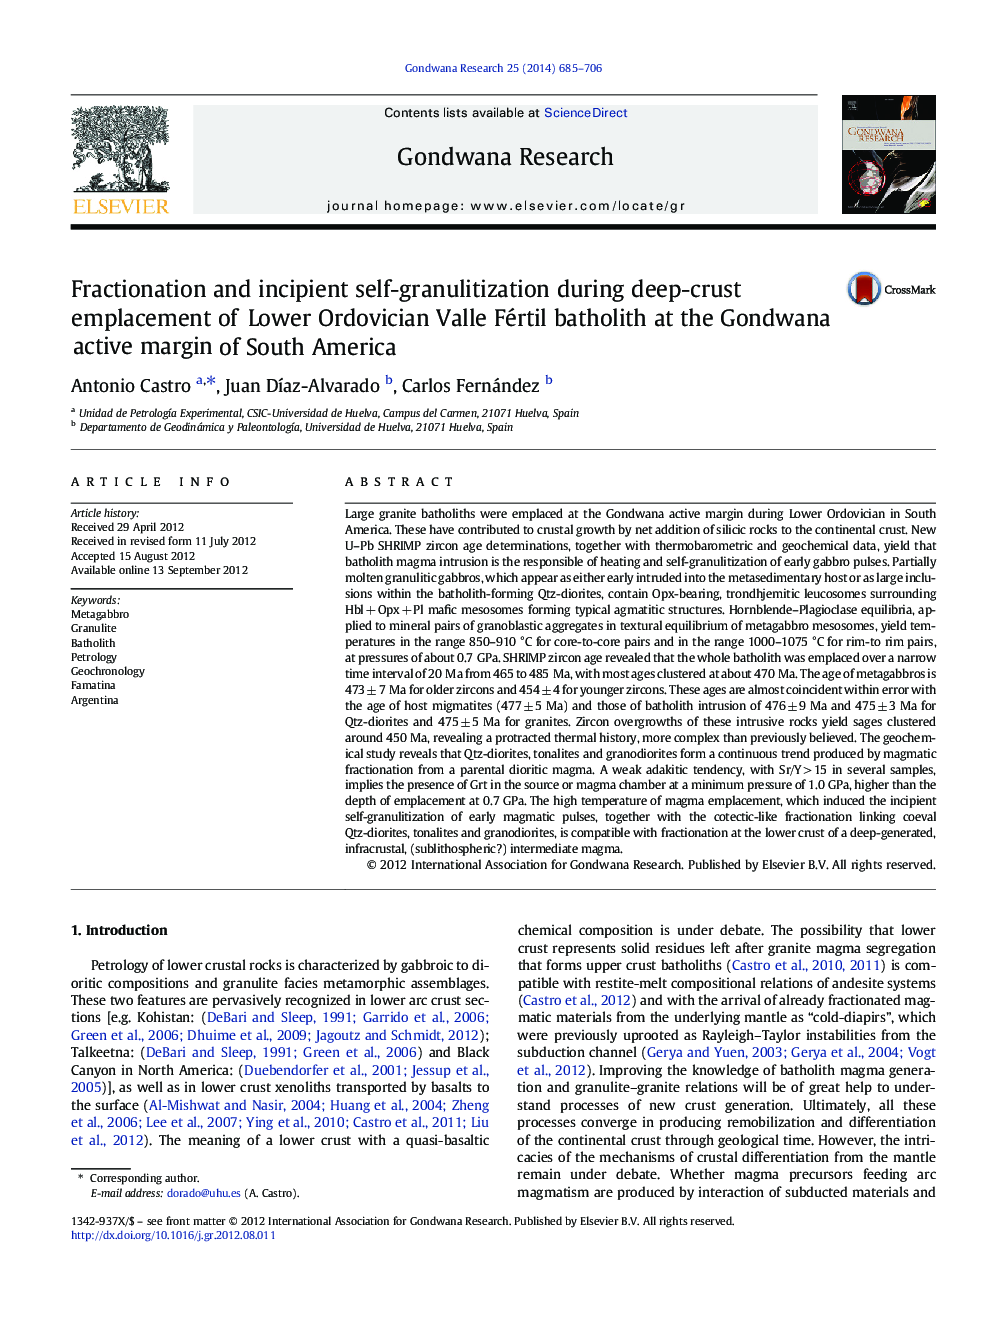 Fractionation and incipient self-granulitization during deep-crust emplacement of Lower Ordovician Valle Fértil batholith at the Gondwana active margin of South America